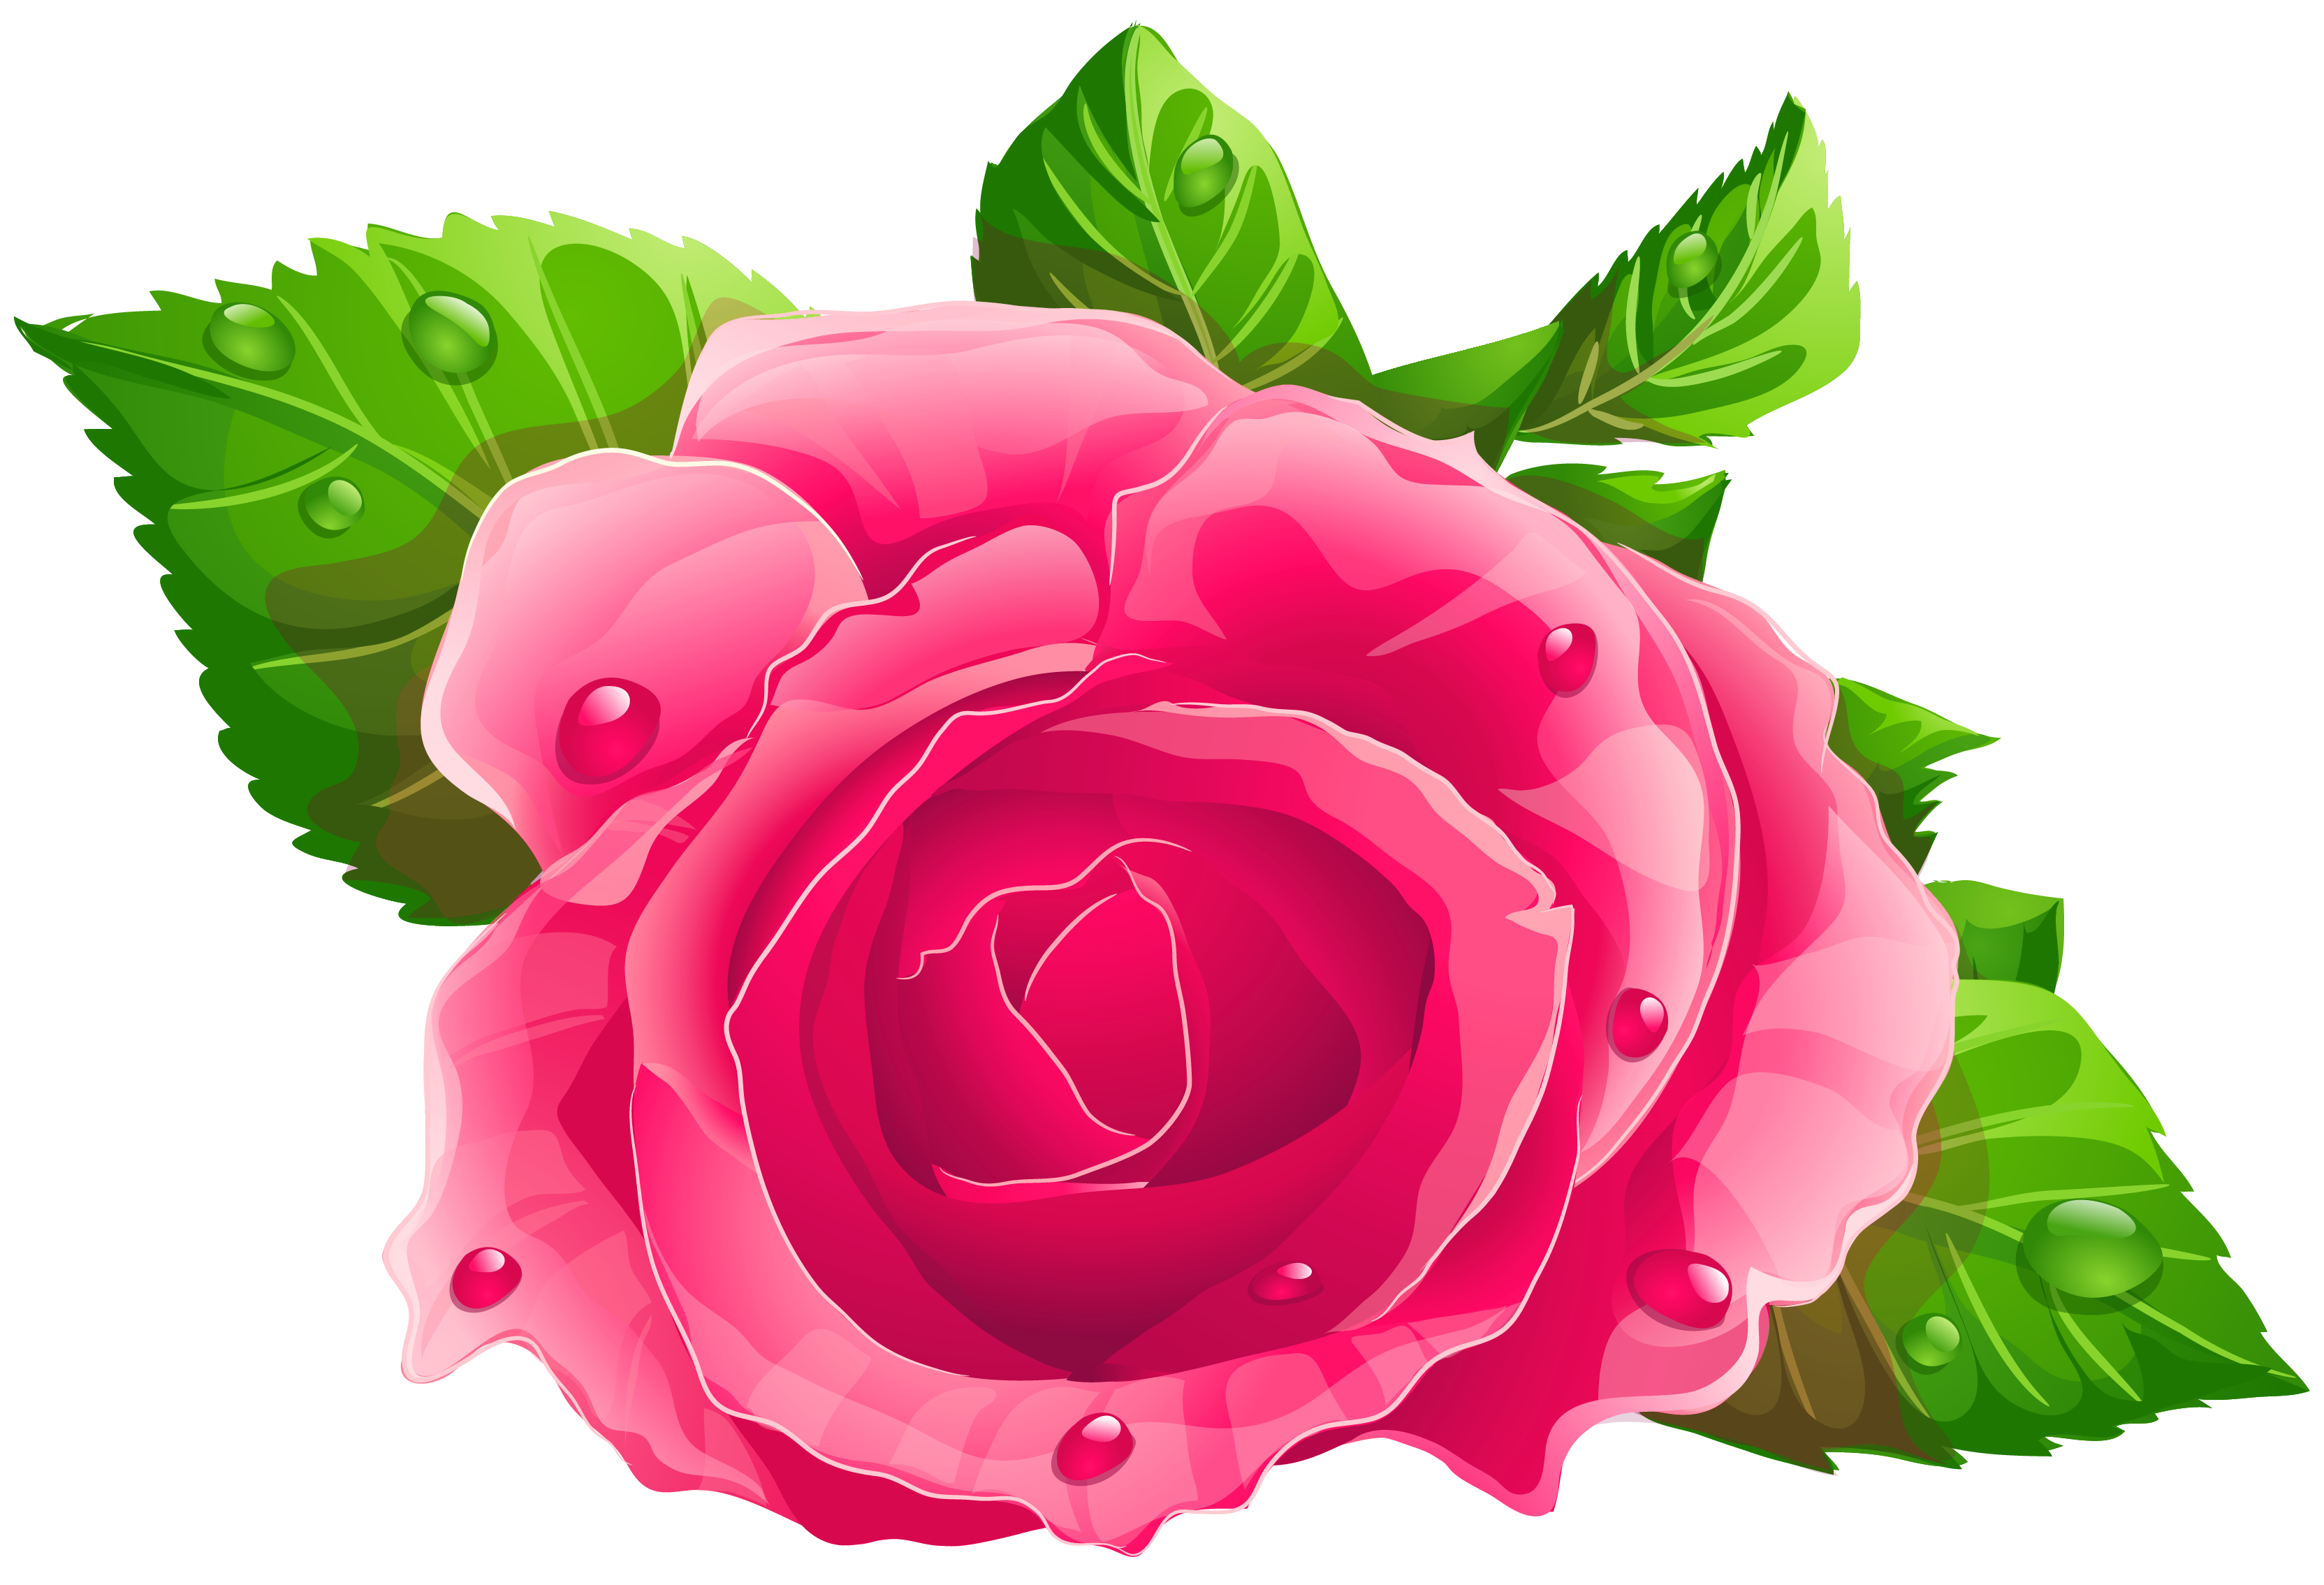 Download free png transparent. Flowers clipart rose